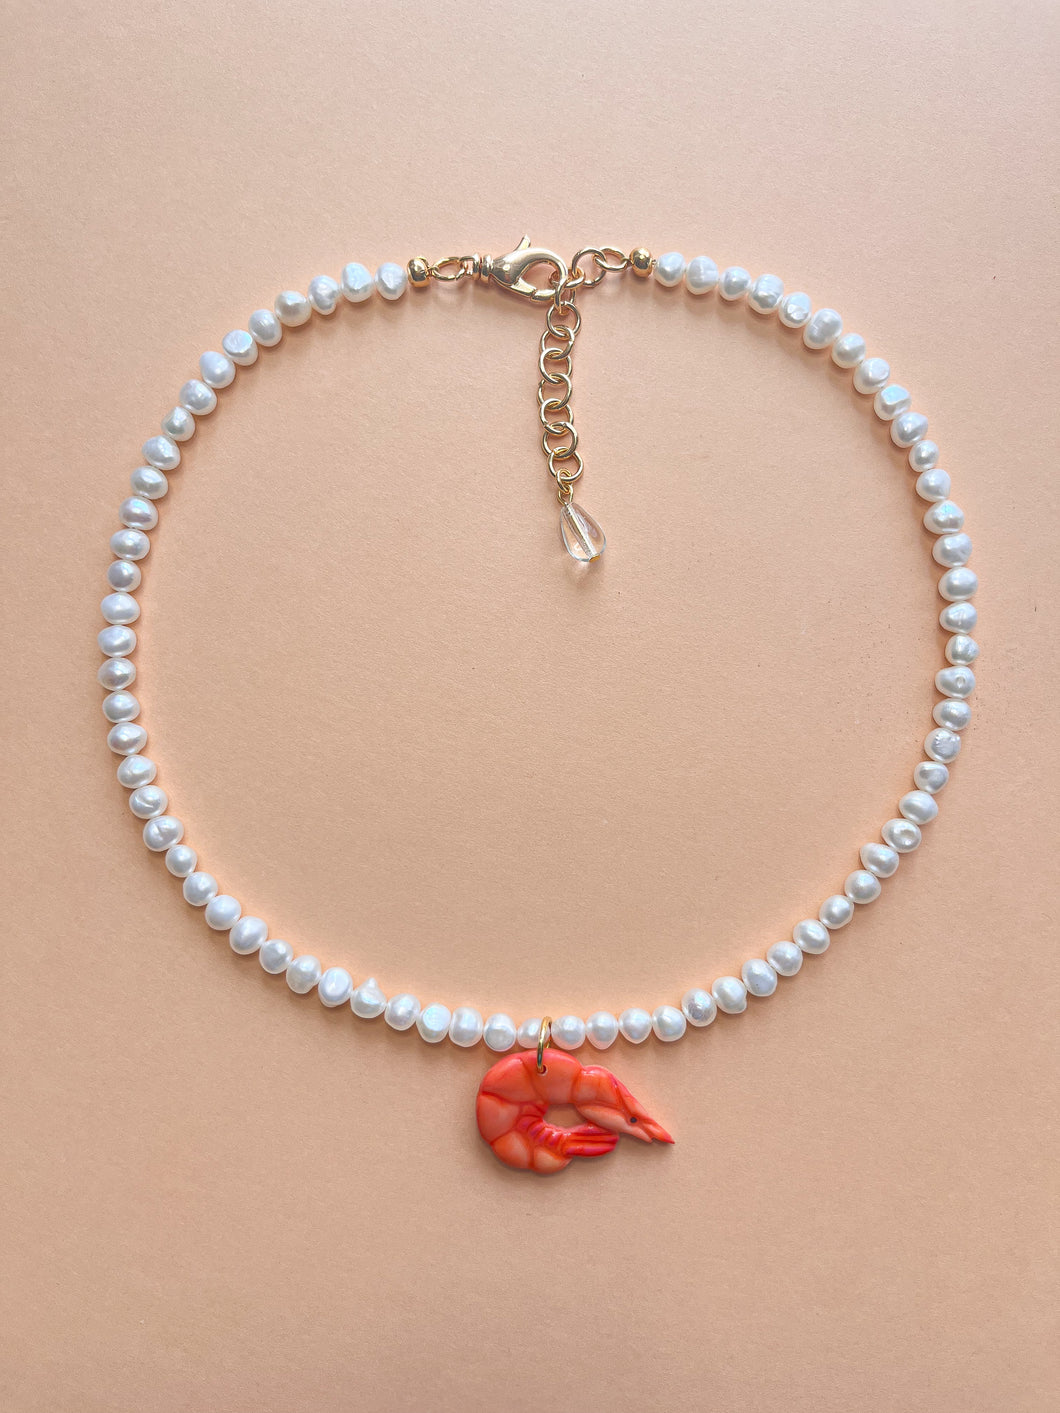 Prawn and Pearls Necklace